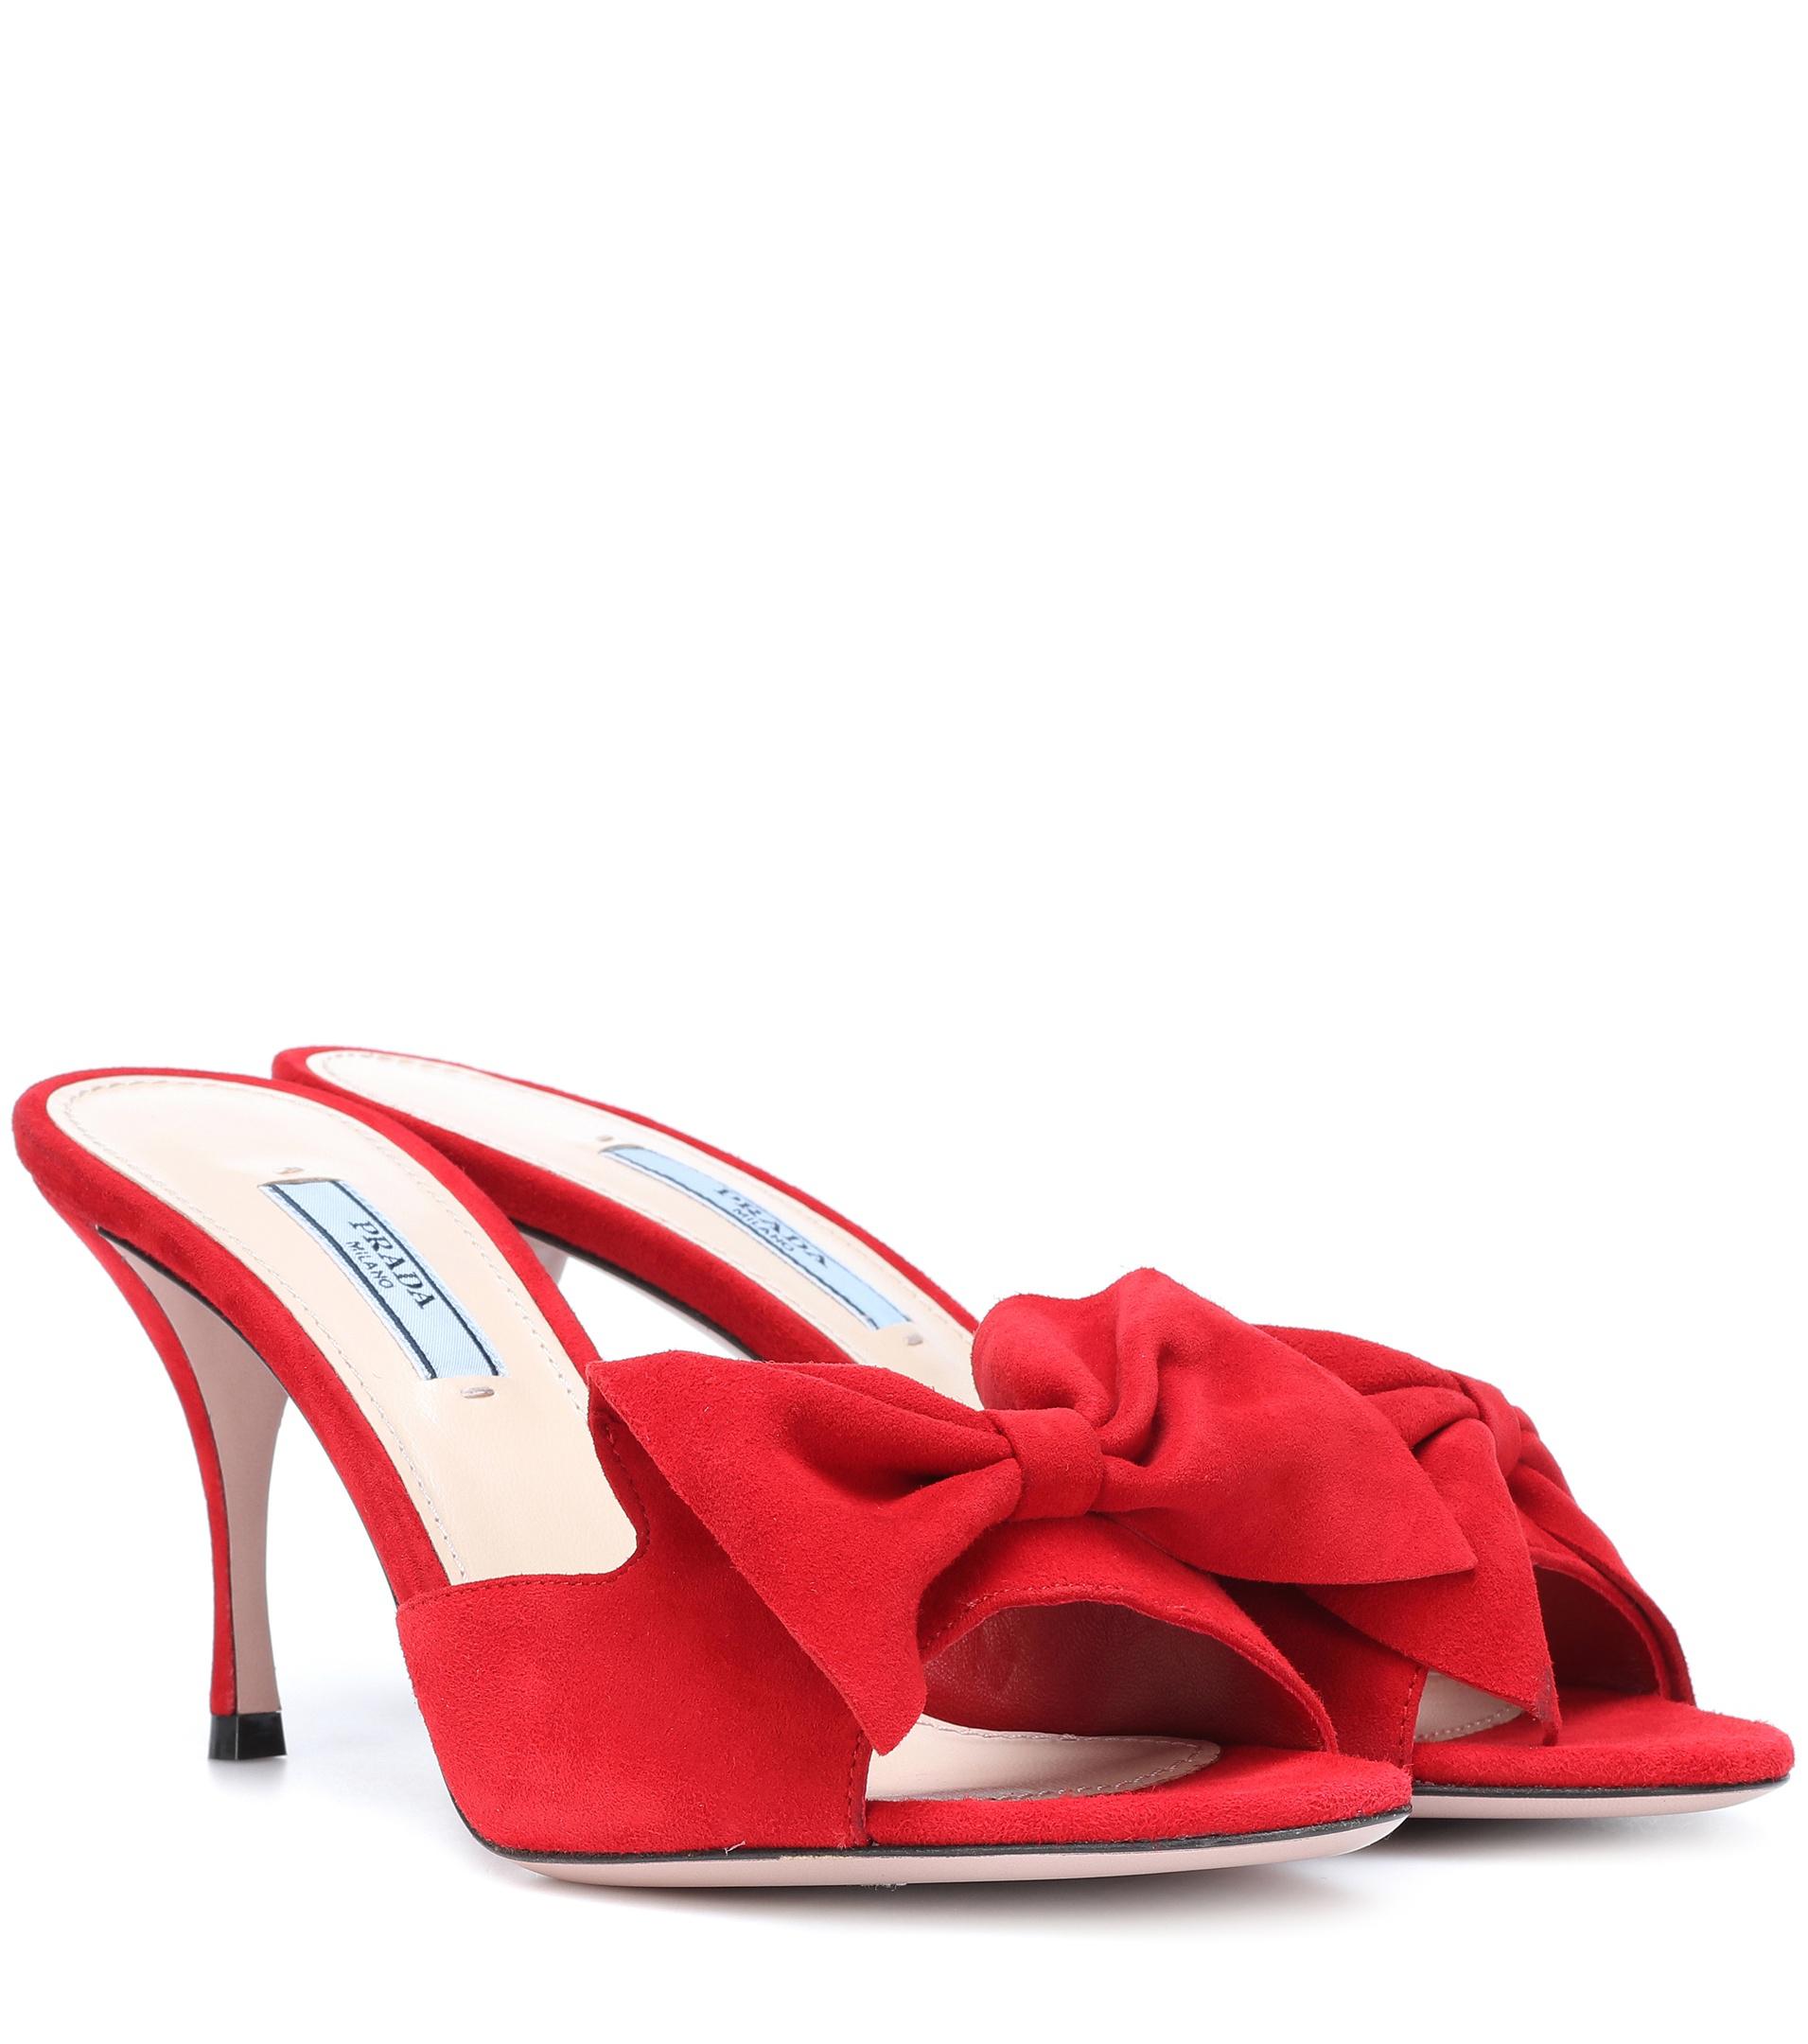 Prada Suede Bow Mules in Red | Lyst